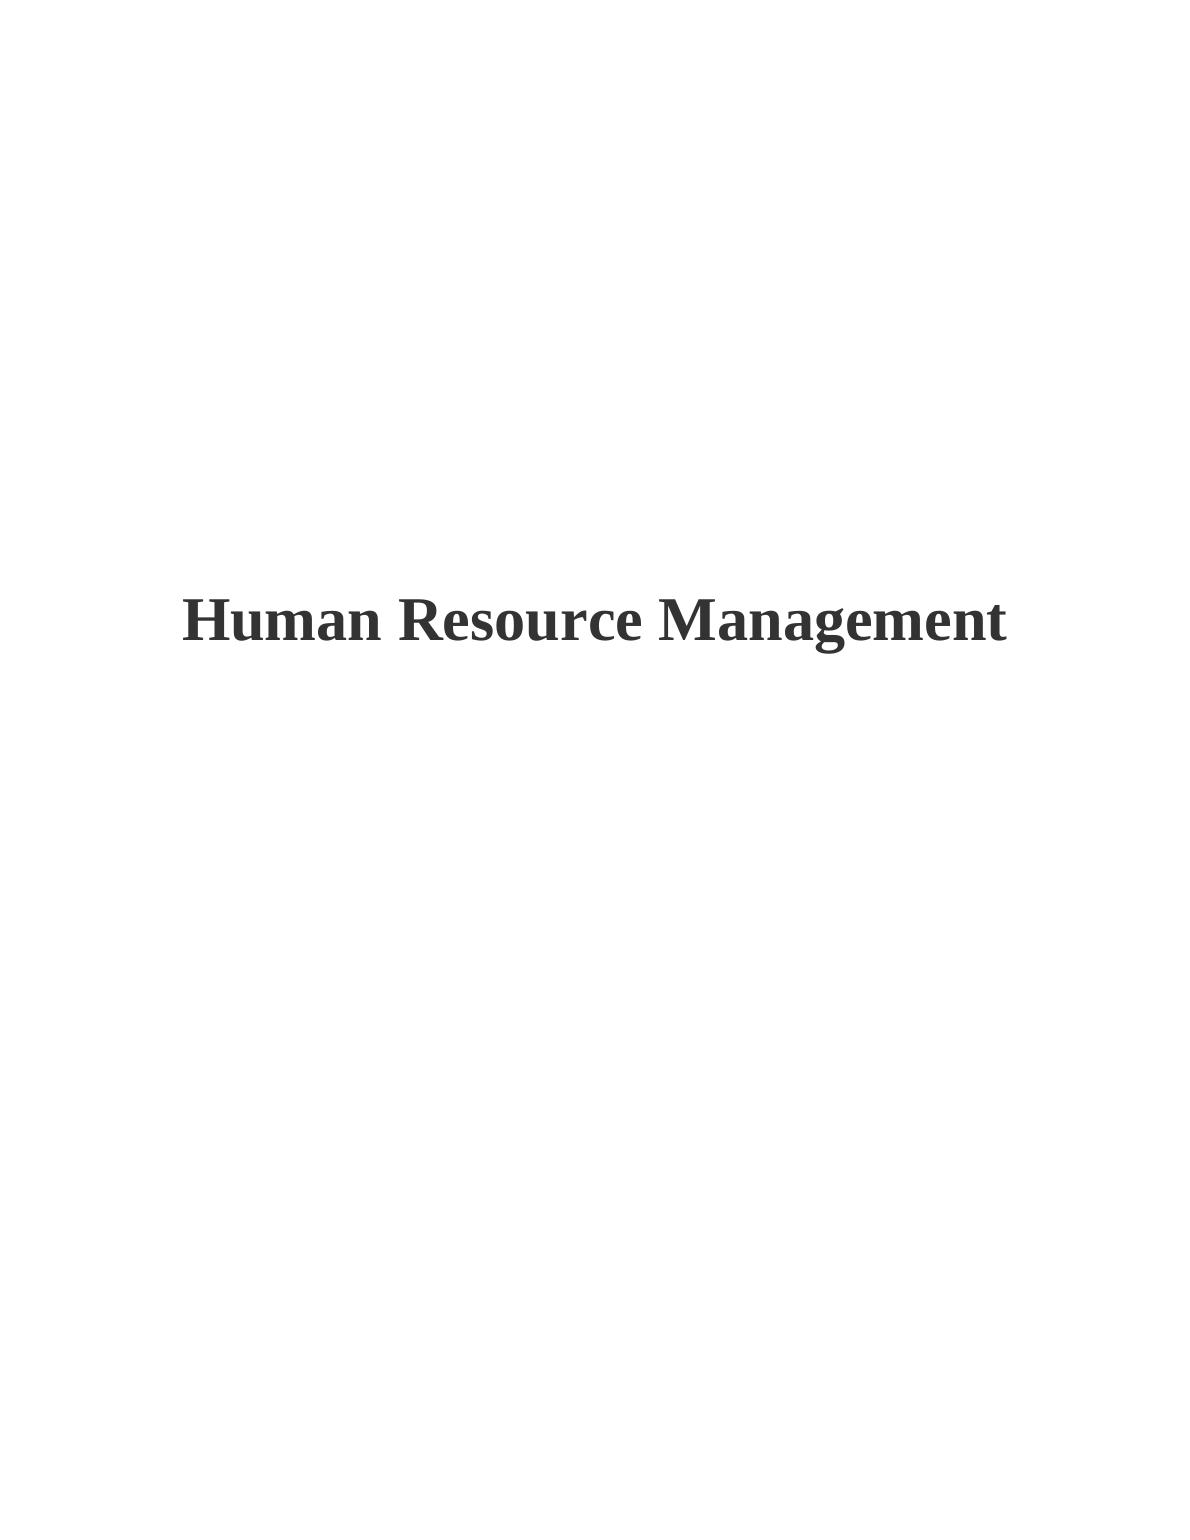 Human Resource Management: Purpose, Functions, and Recruitment Process_1